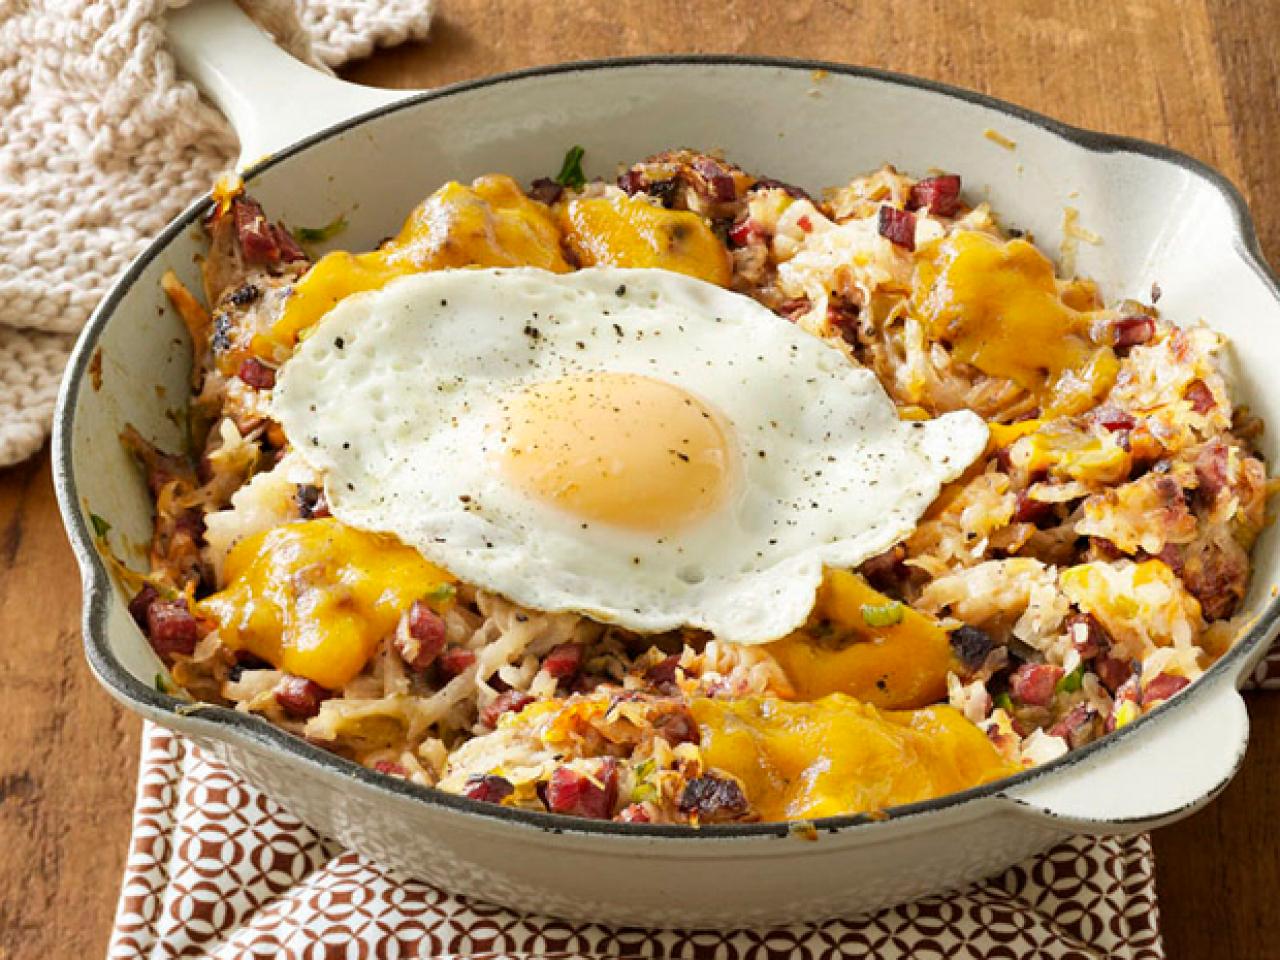 Breakfast for Dinner Recipes  FN Dish - Behind-the-Scenes 